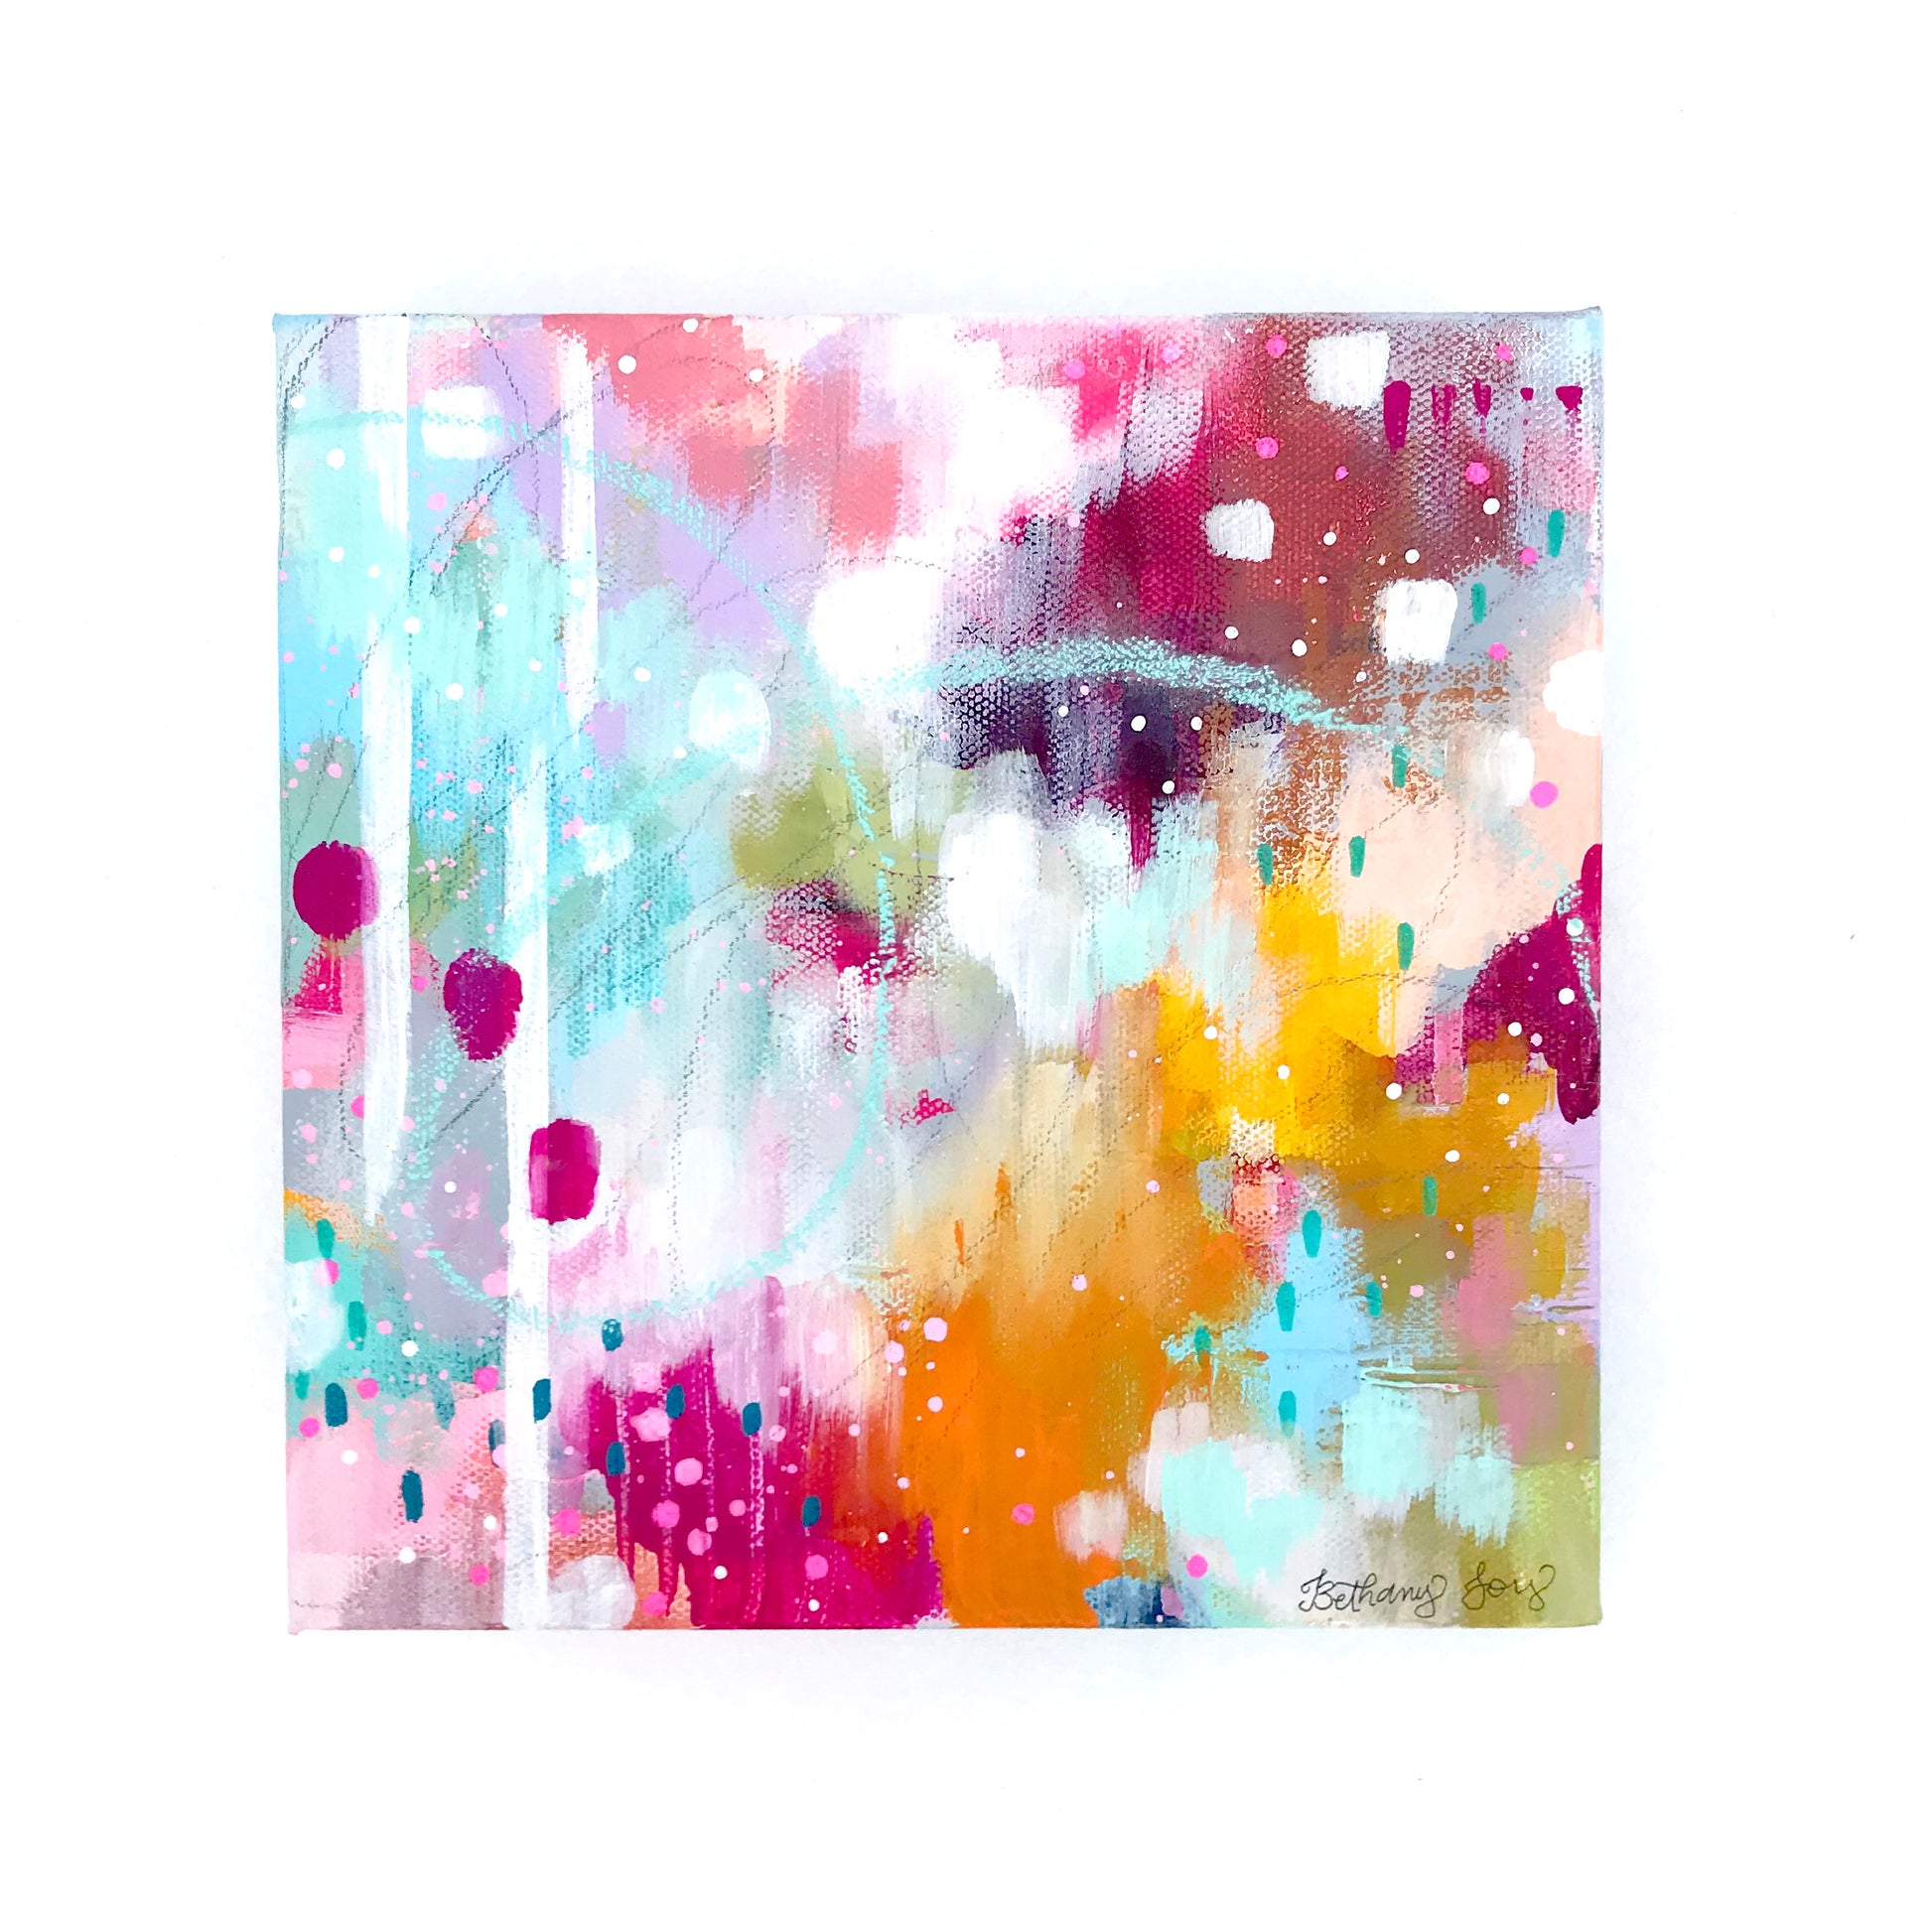 "Stardust" Abstract Original Painting on 8x8 inch Canvas / Colorful Home Decor - Bethany Joy Art